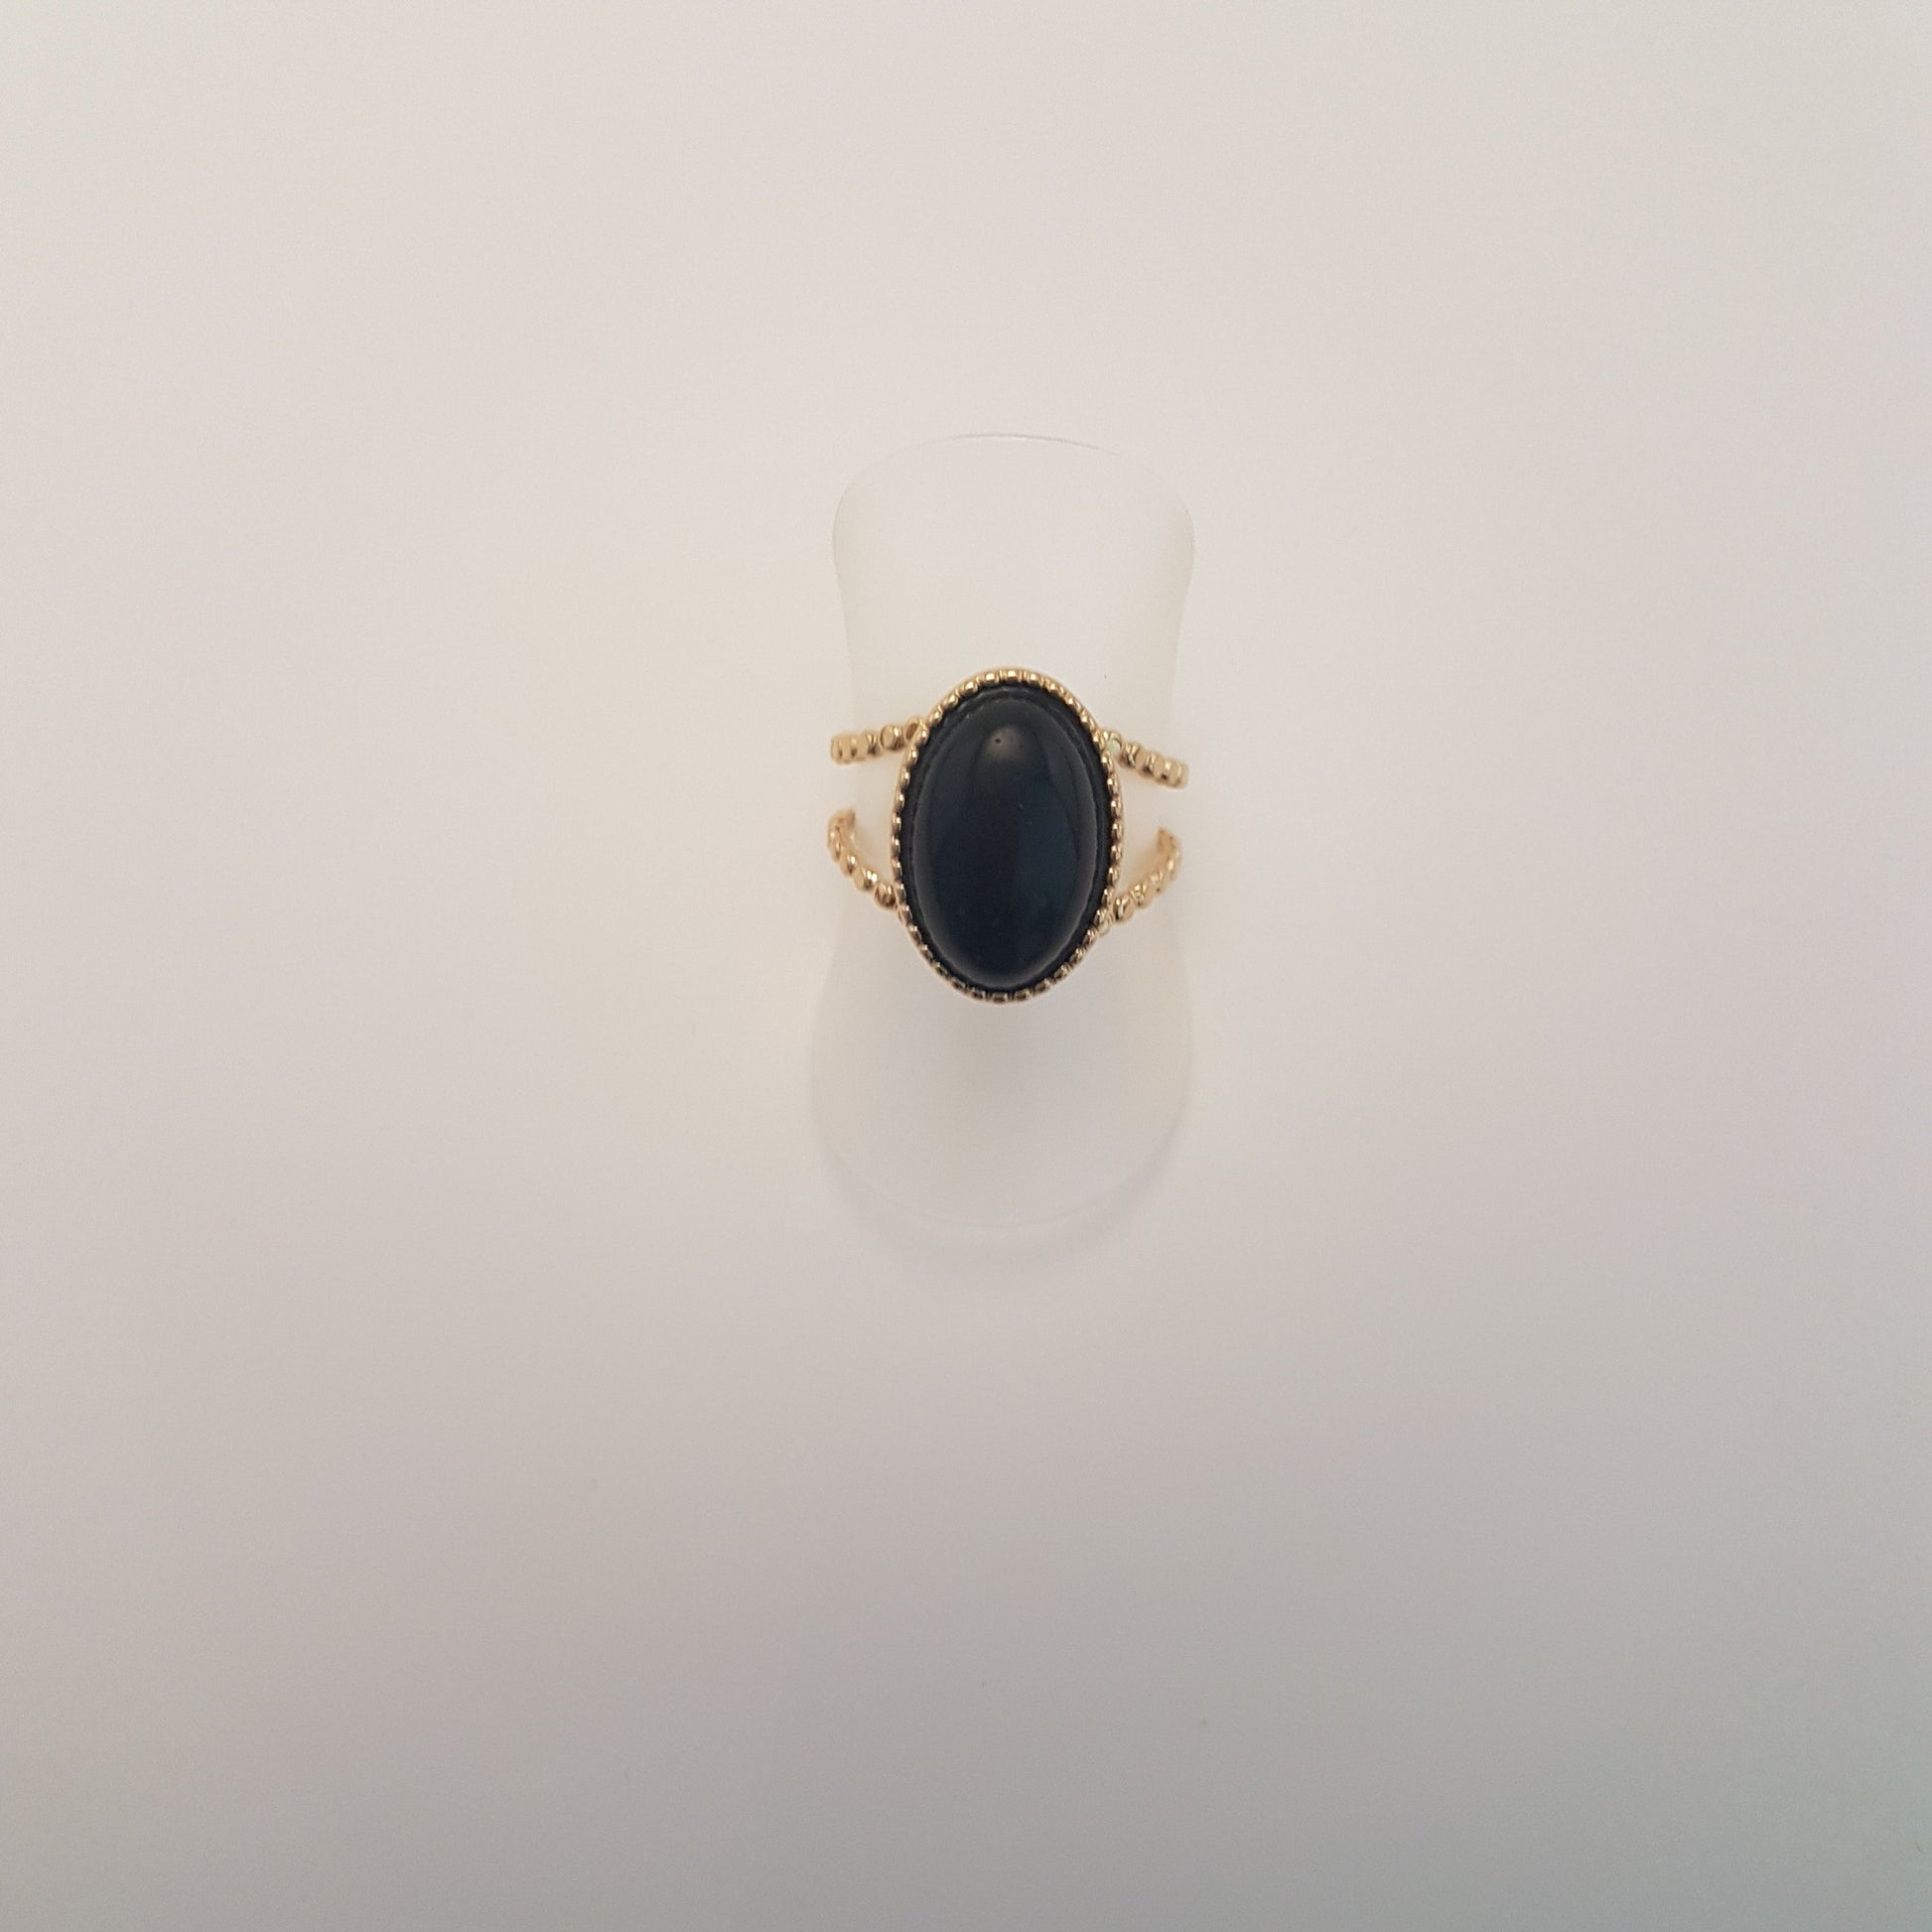 adjustable ring with black onyx stone